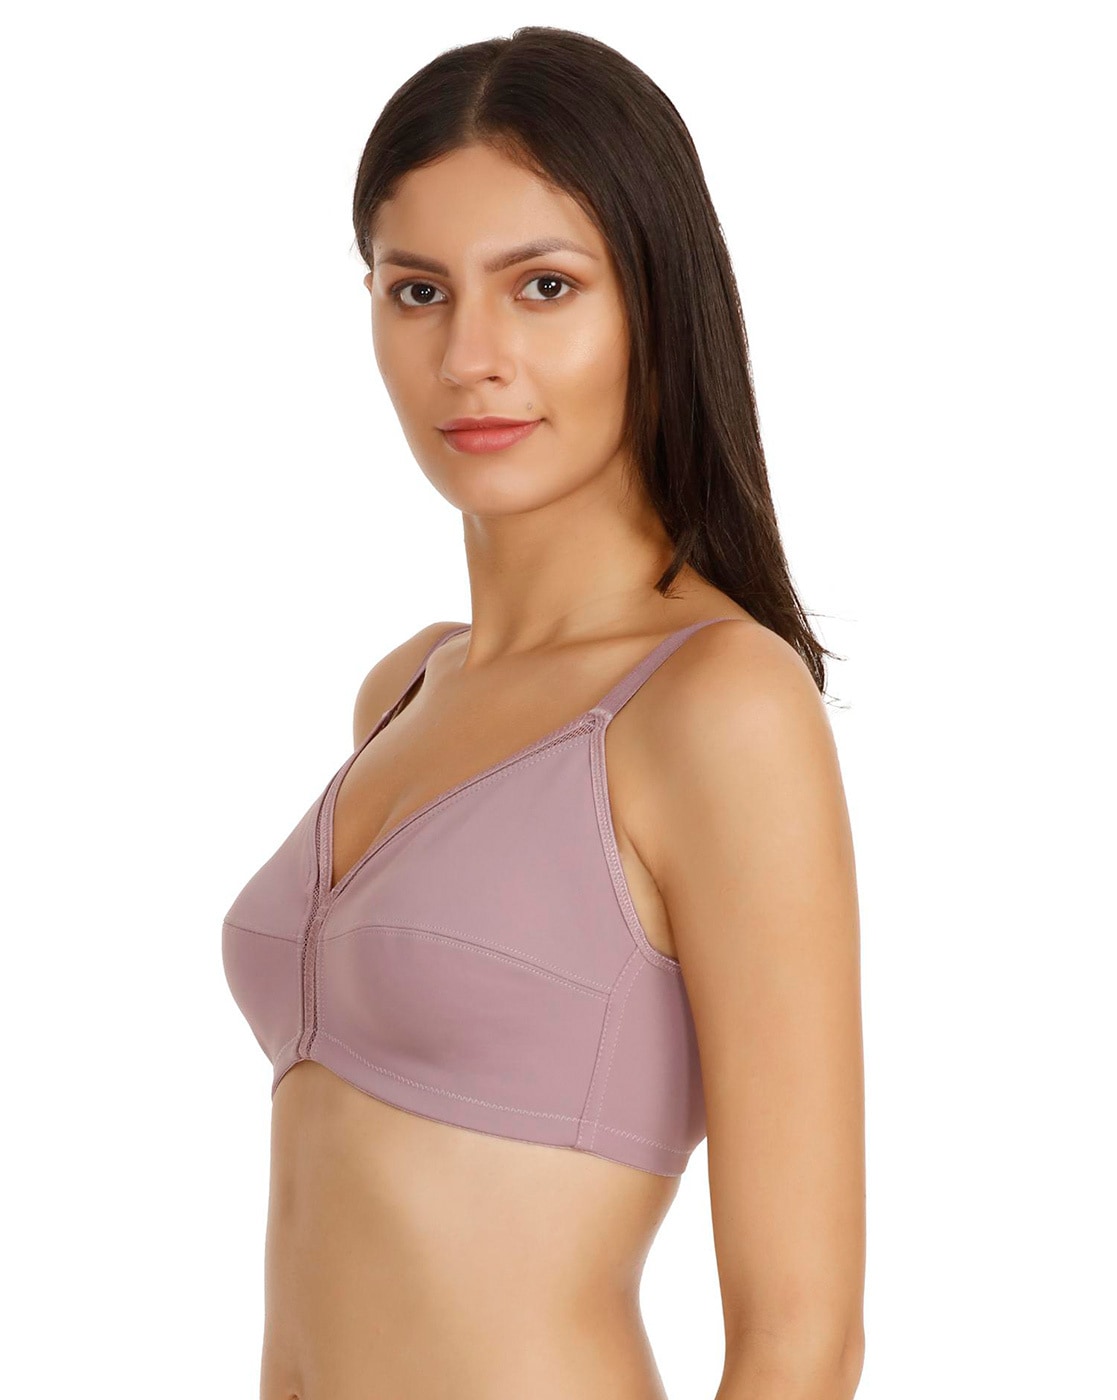 Single Layered Non-Wired Non-Padded Full Coverage Minimiser Bra